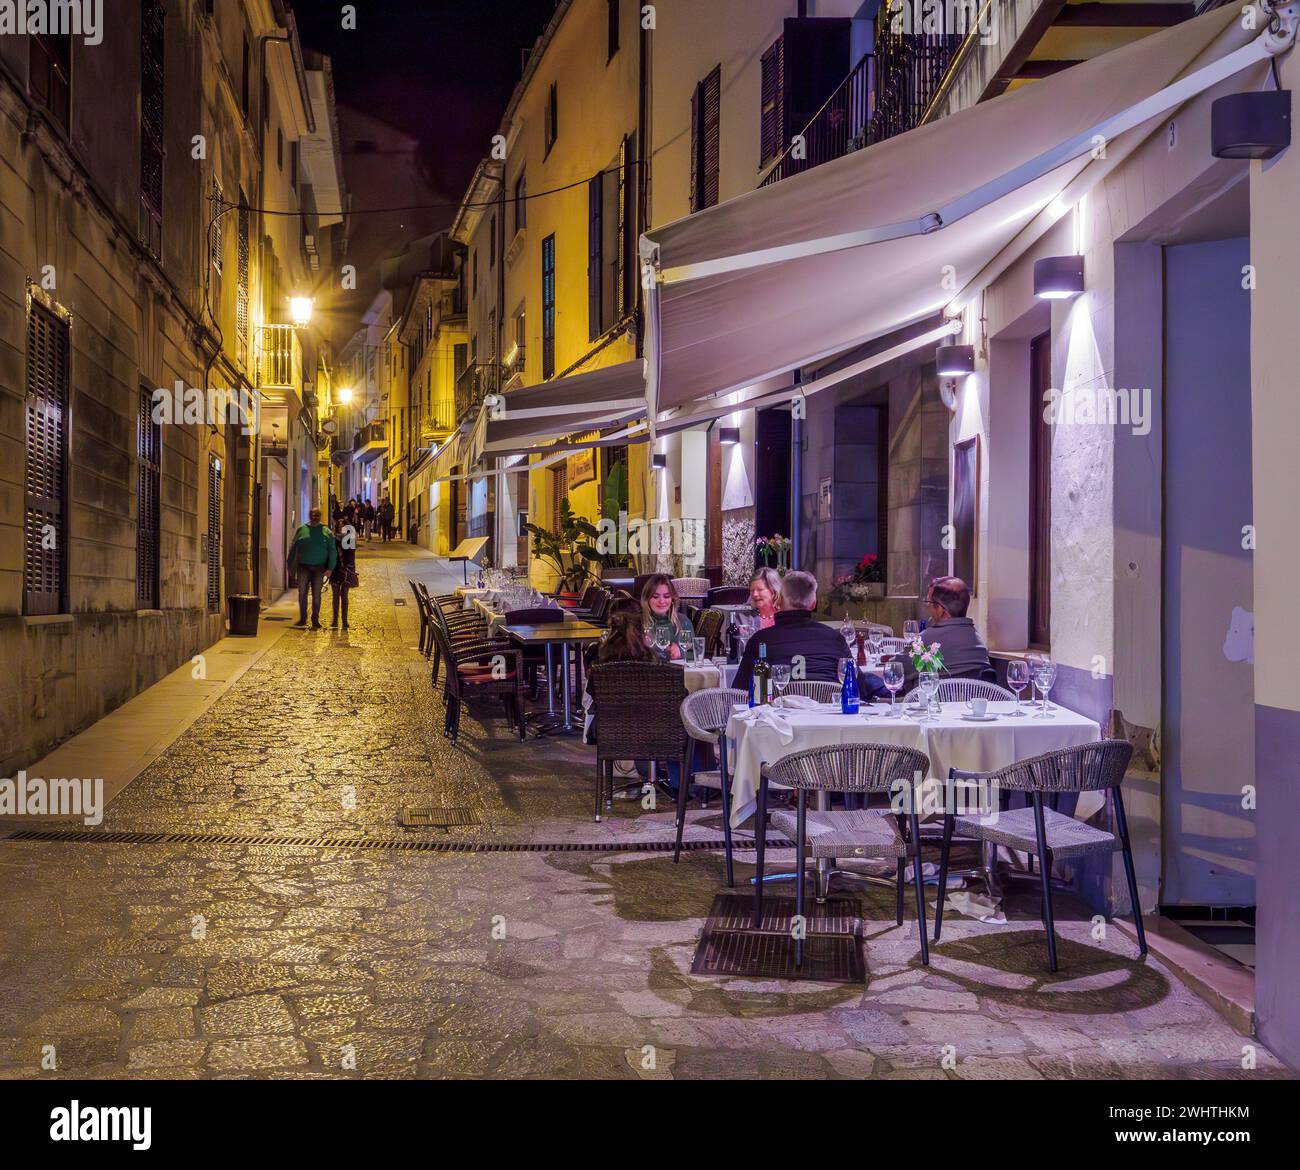 Night street scene with al fresco diners outside a restaurant in the town of Soller in the Tramuntana Mountains of Majorca Spain Stock Photo